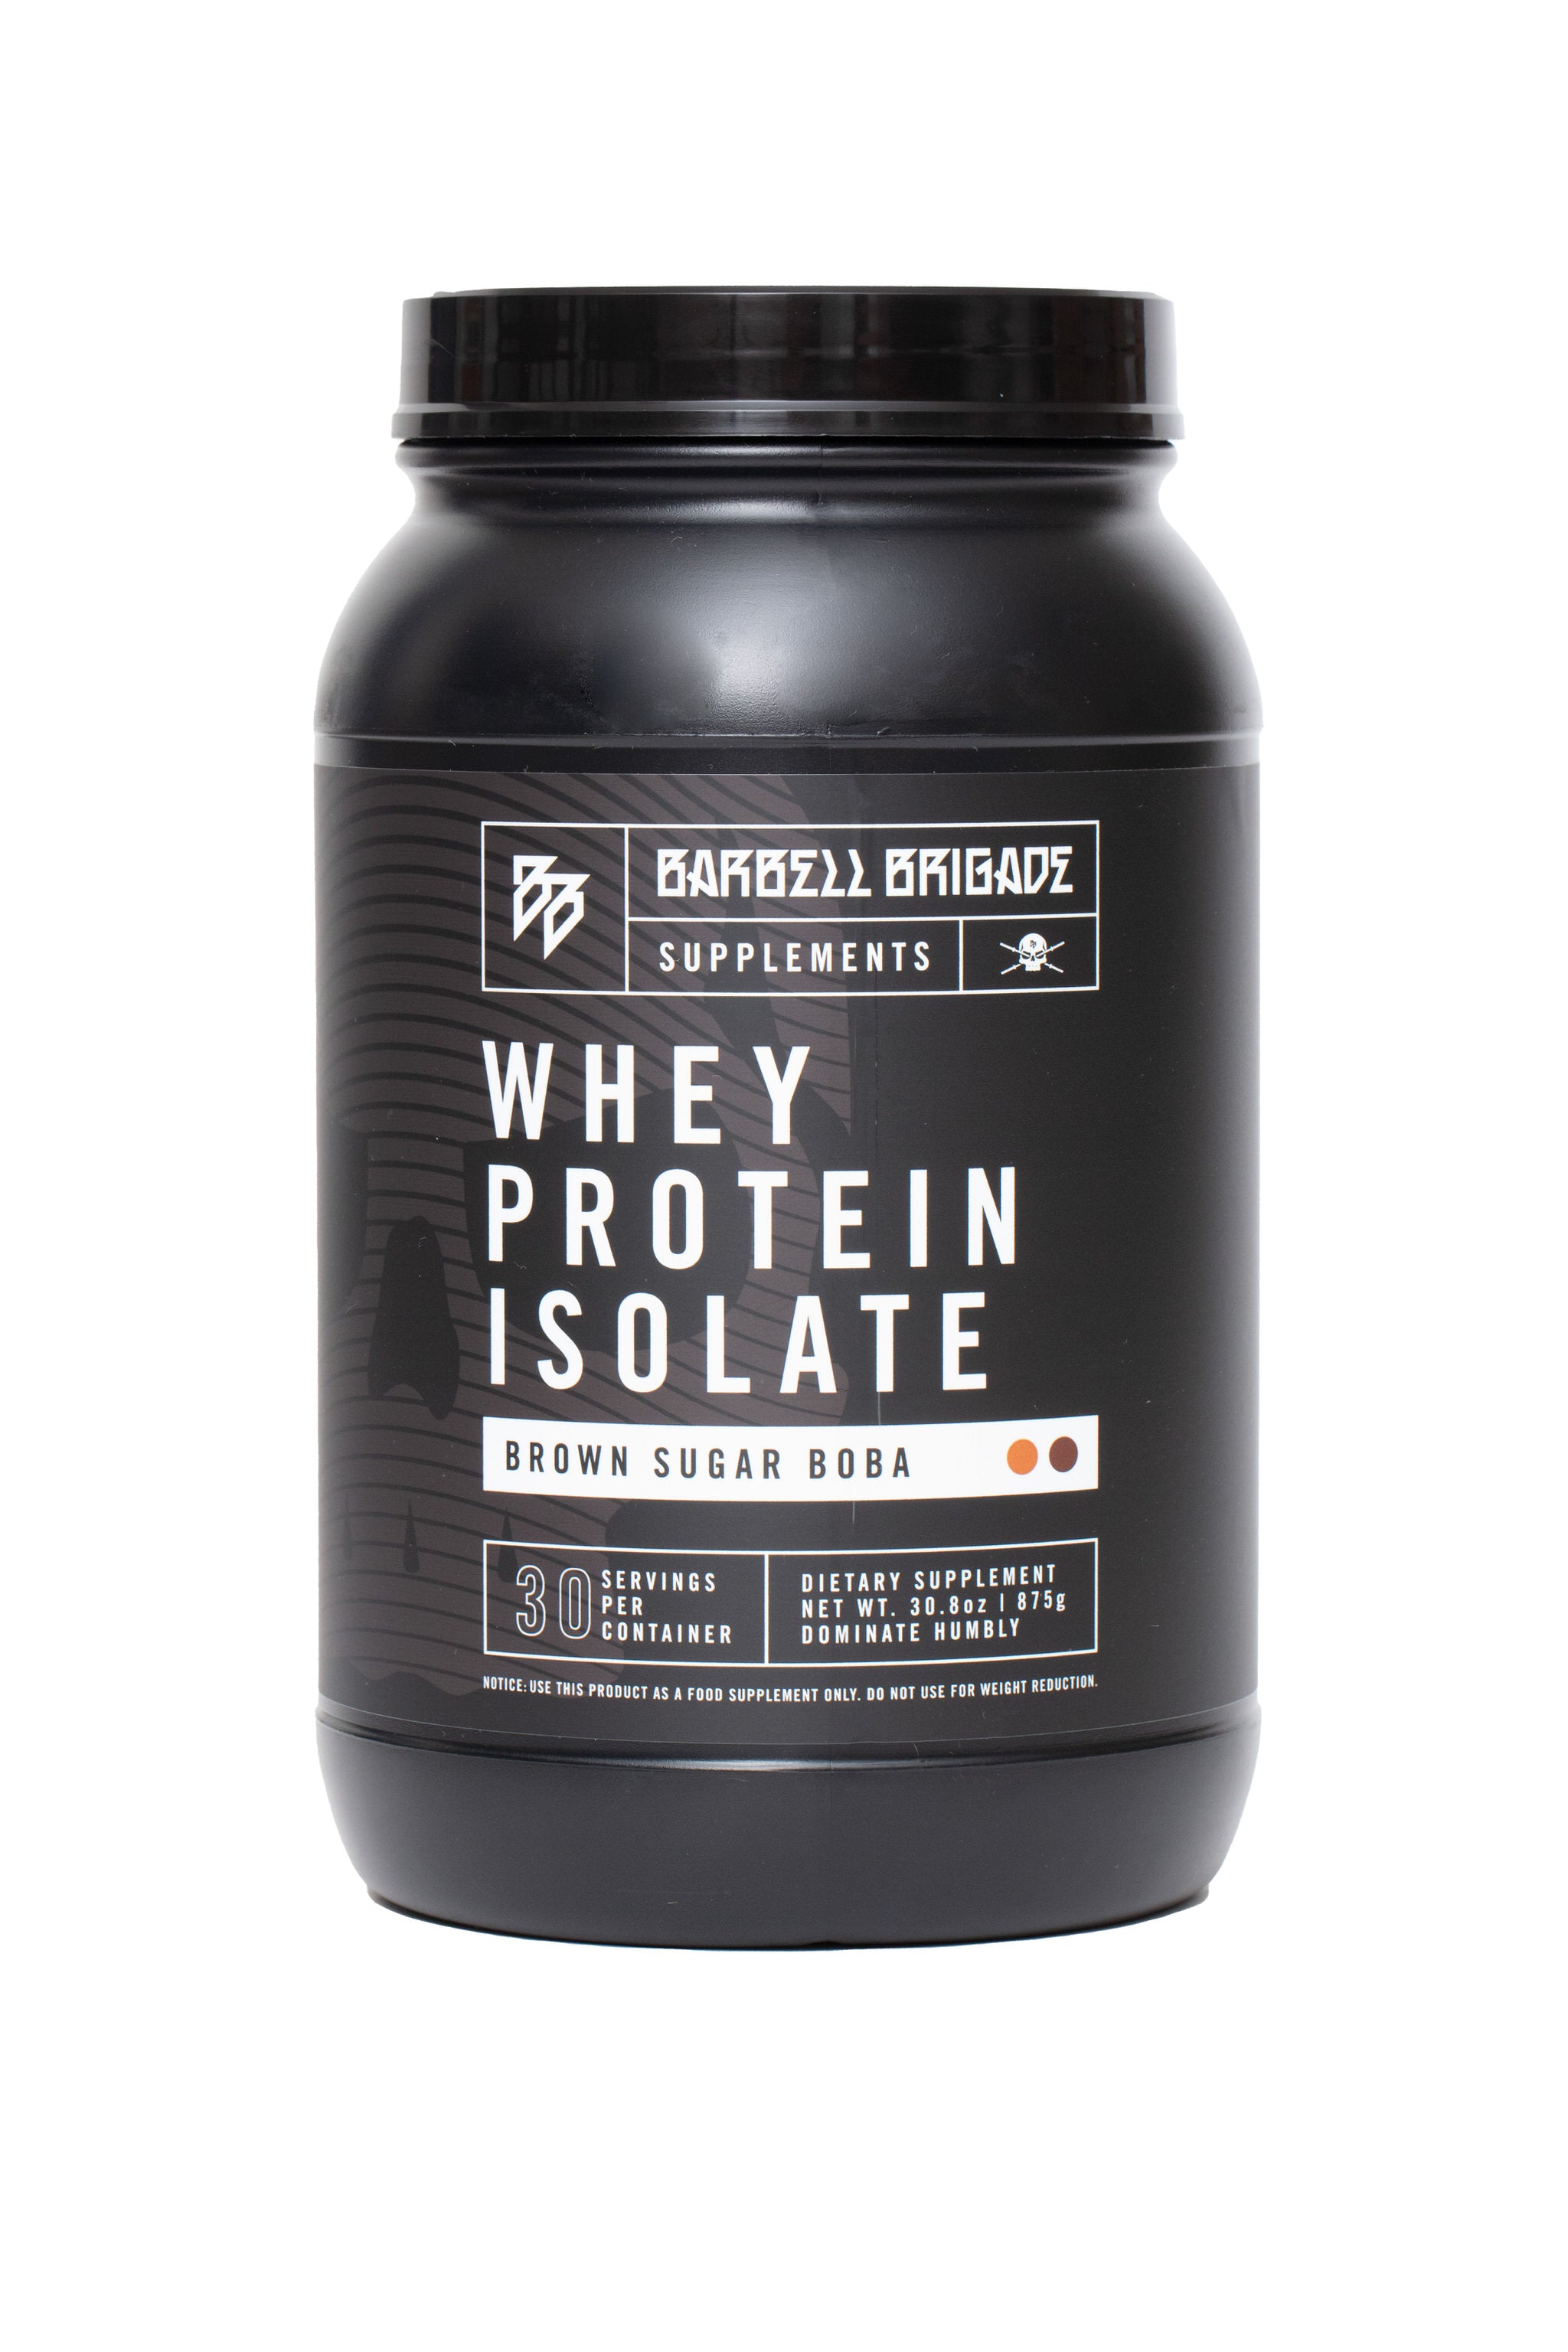 BB - Whey Protein Isolate (Brown Sugar Boba)